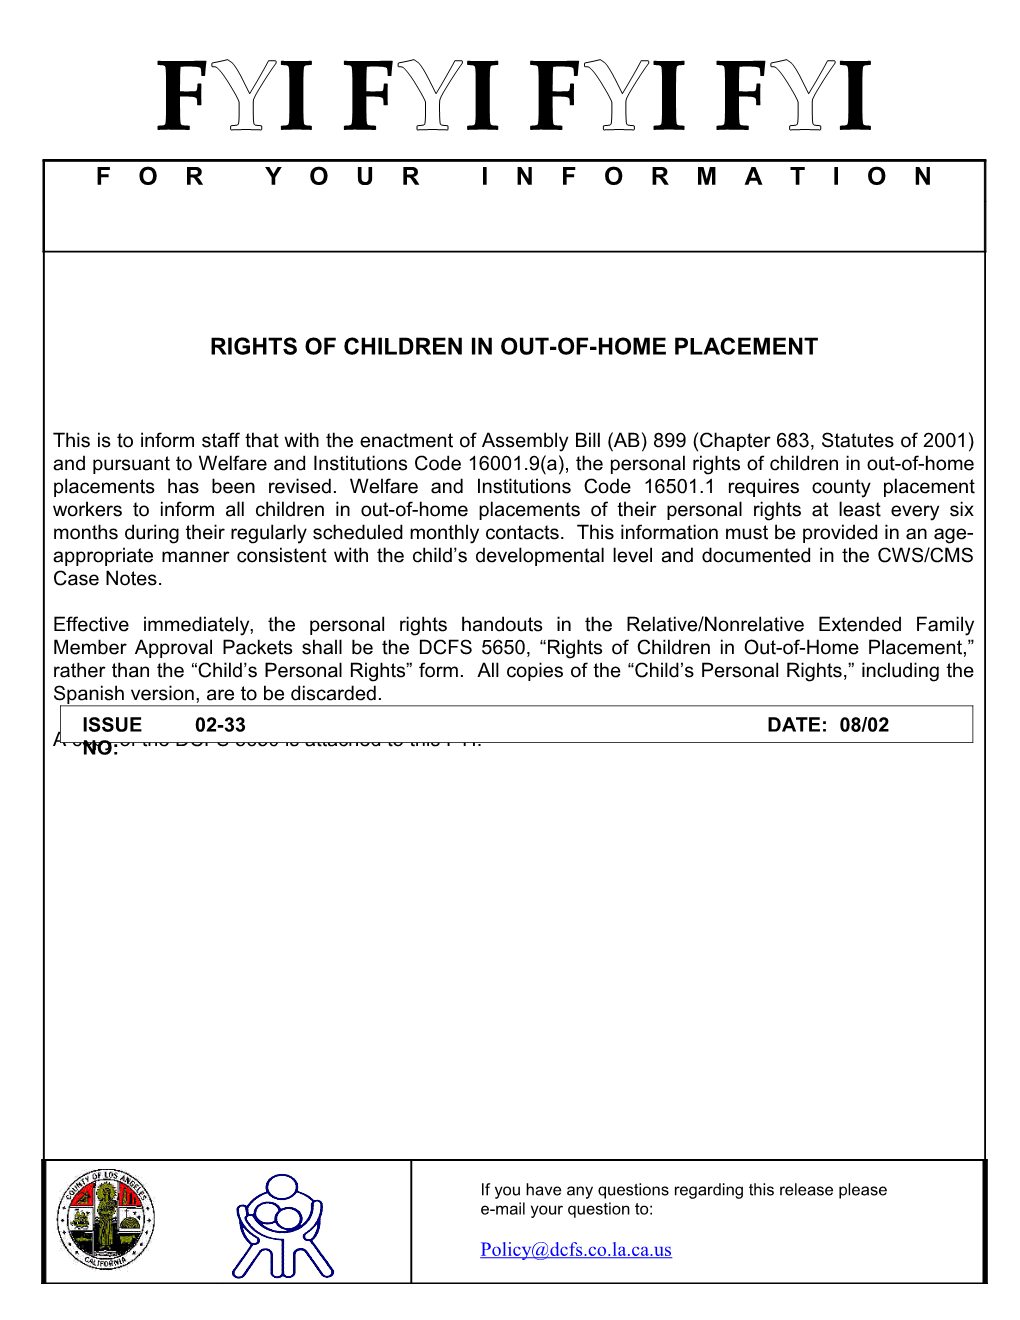 Rights to Children in Out-Of Home Placement